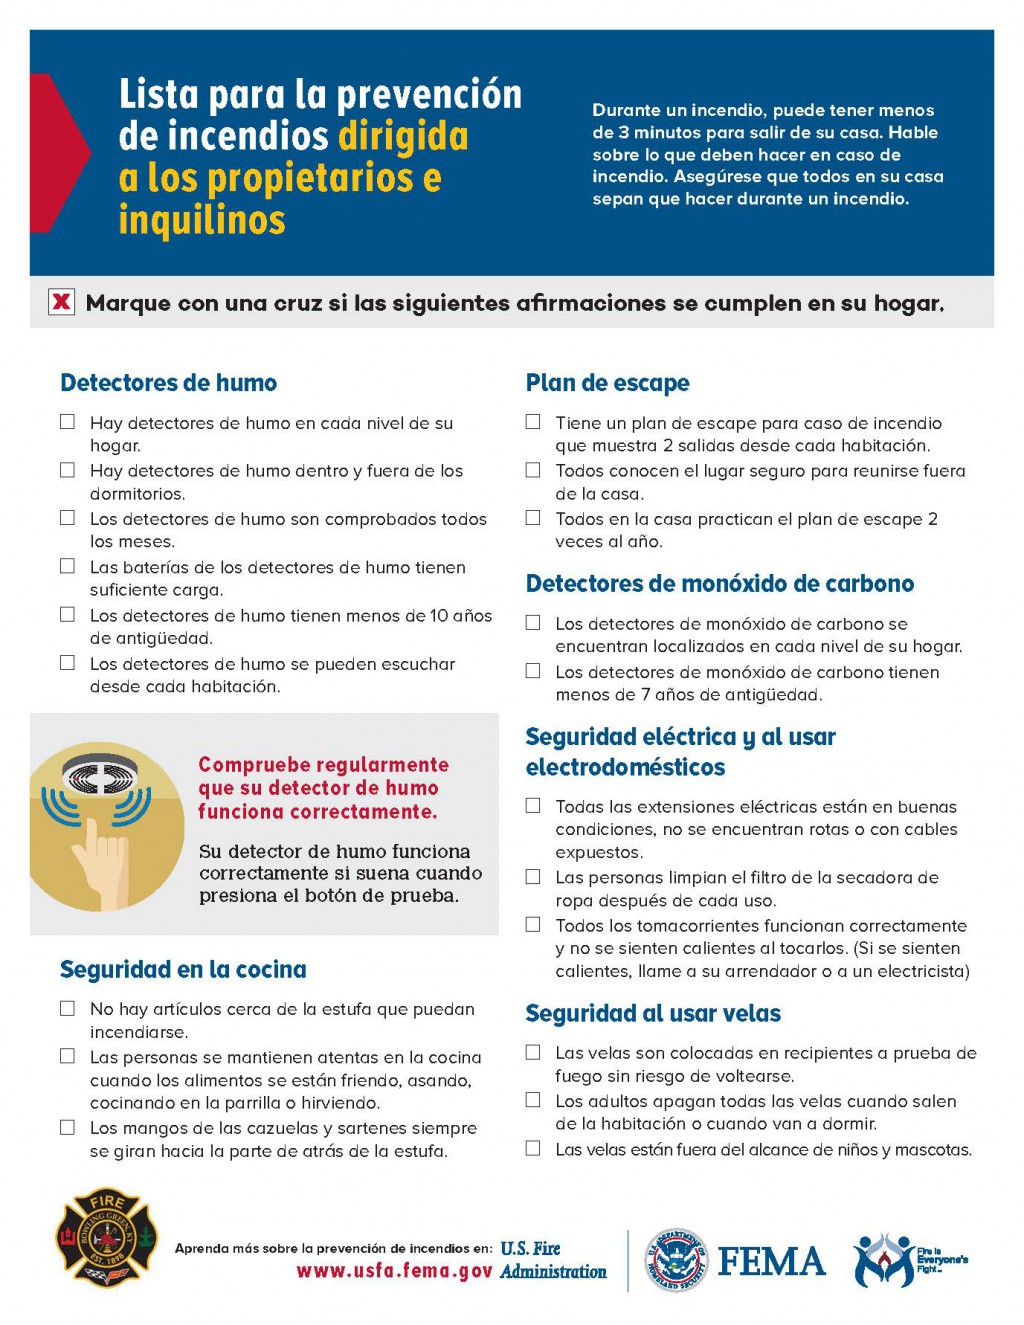 Fire Safety Checklist for Homeowners and Renters Spanish